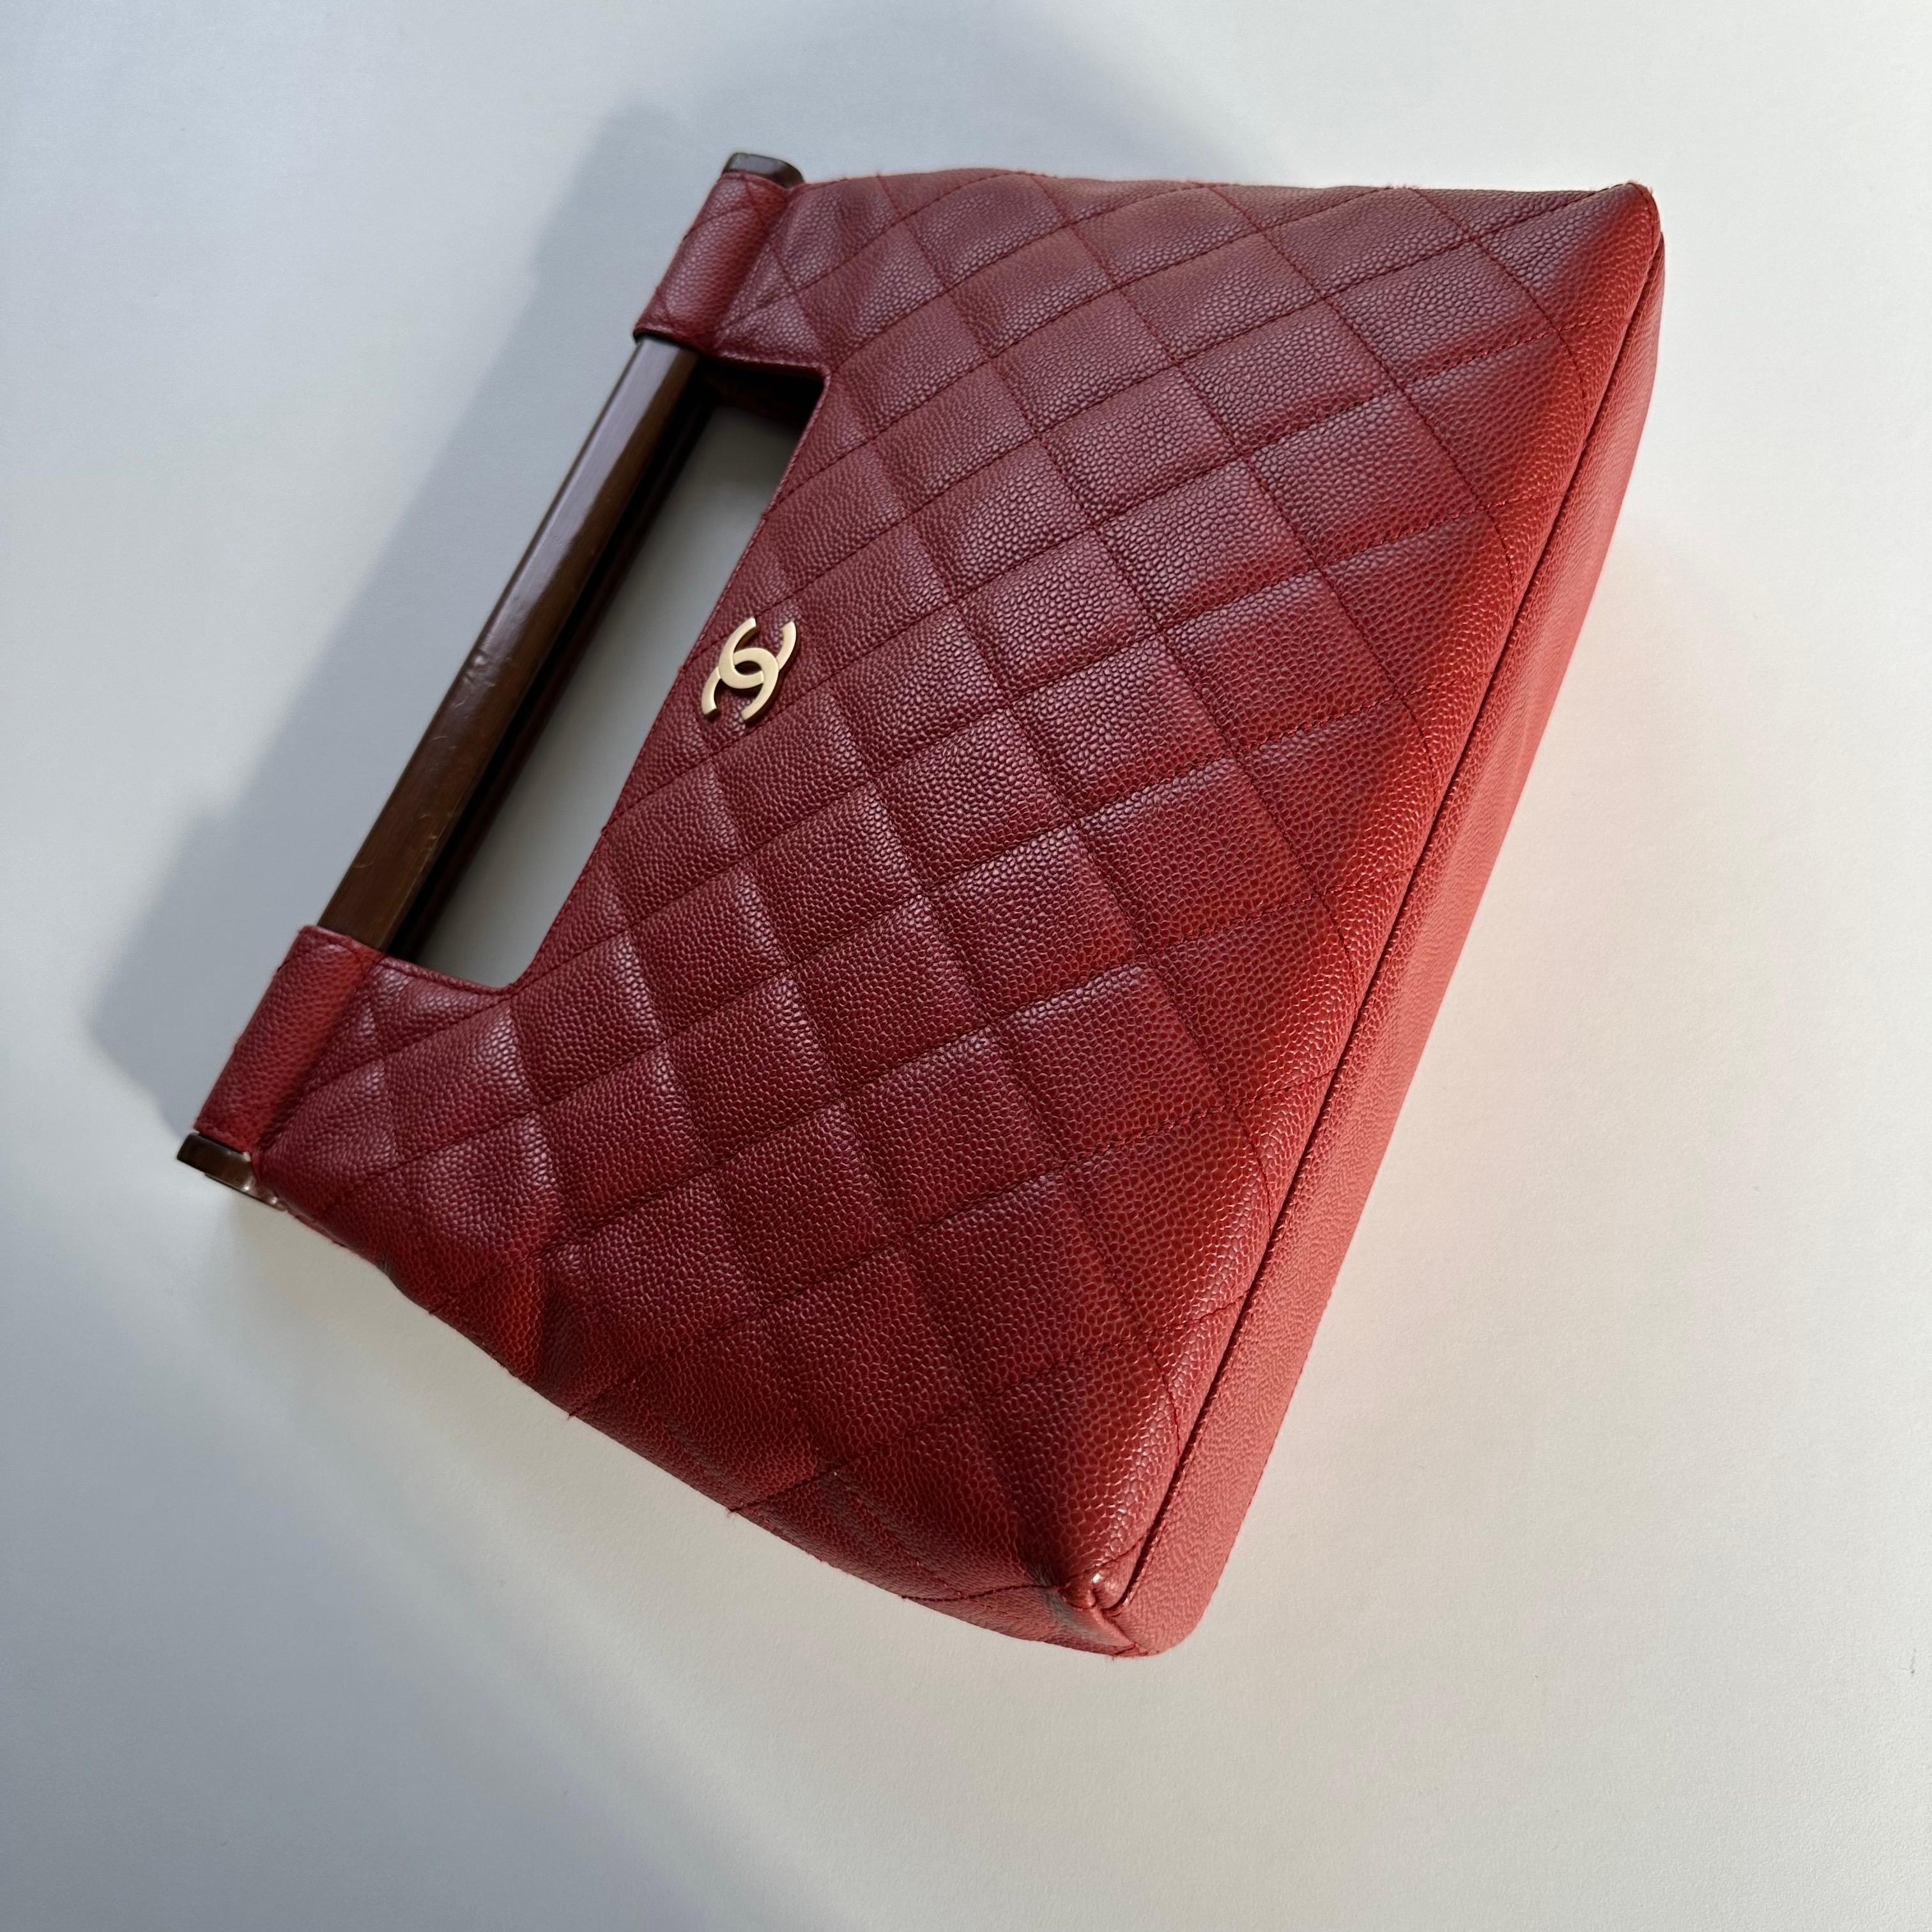 Chanel 2003 Holz Top Handle Rare Red Caviar Jumbo Kelly Envelope Clutch Tote Bag im Angebot 4